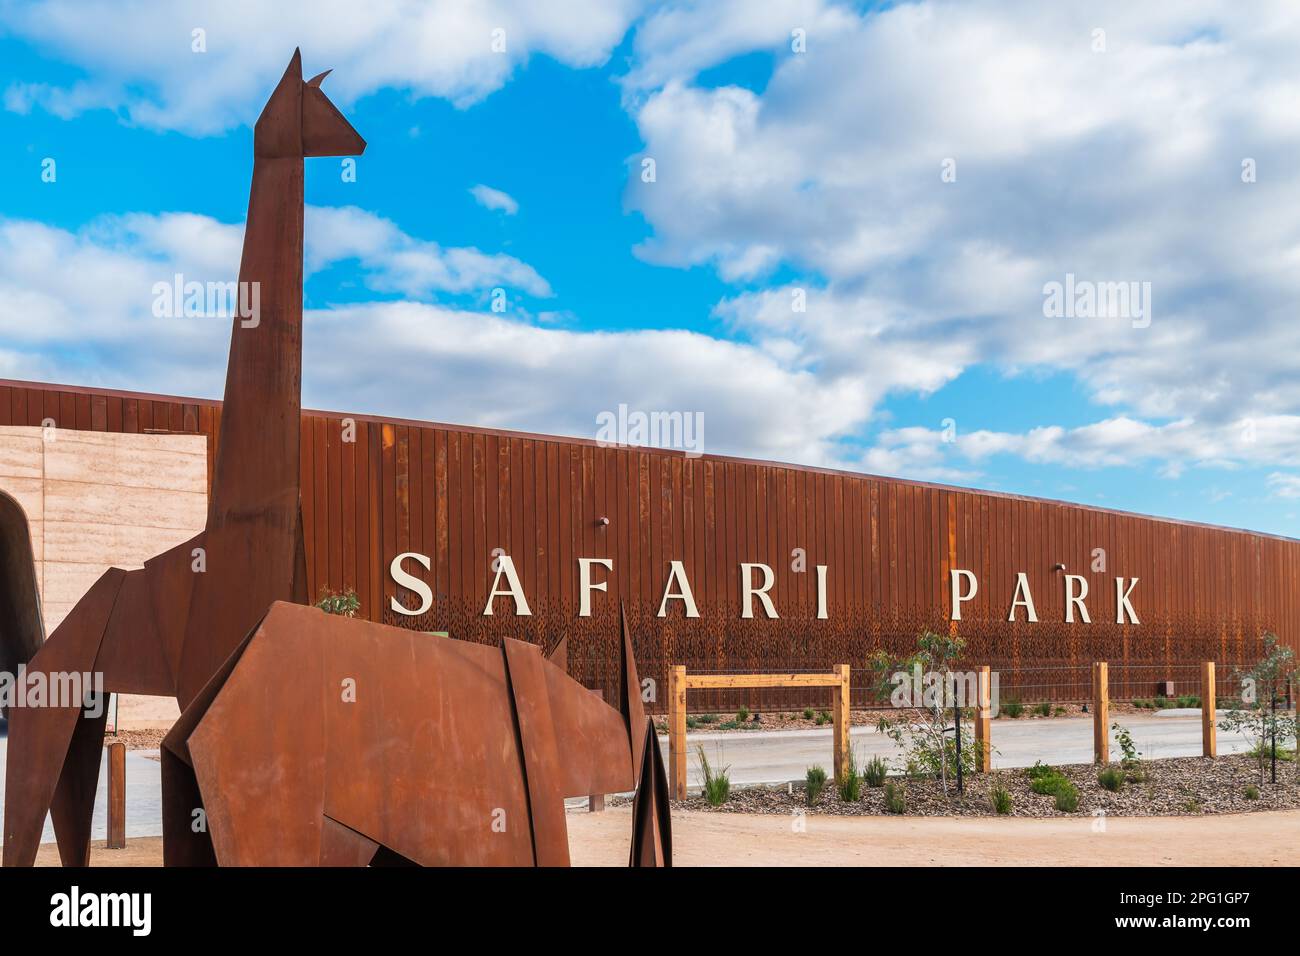 Adelaide, South Australia - May 8, 2022: Monarto Safari Park new entrance with metal scultures viewed from the car park side on a day Stock Photo